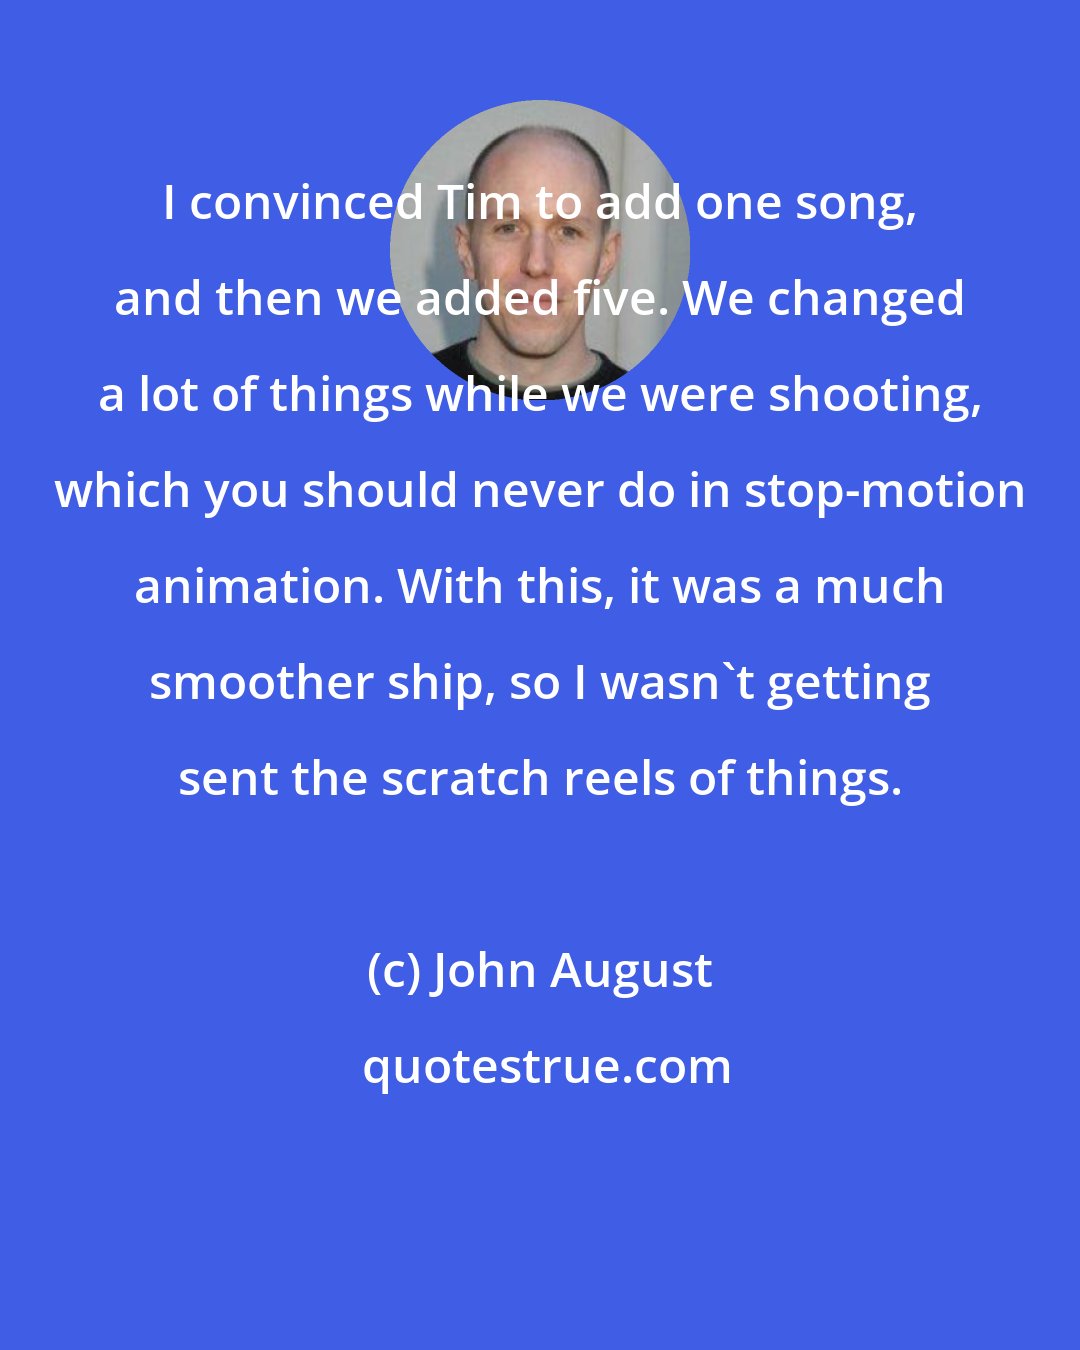 John August: I convinced Tim to add one song, and then we added five. We changed a lot of things while we were shooting, which you should never do in stop-motion animation. With this, it was a much smoother ship, so I wasn't getting sent the scratch reels of things.